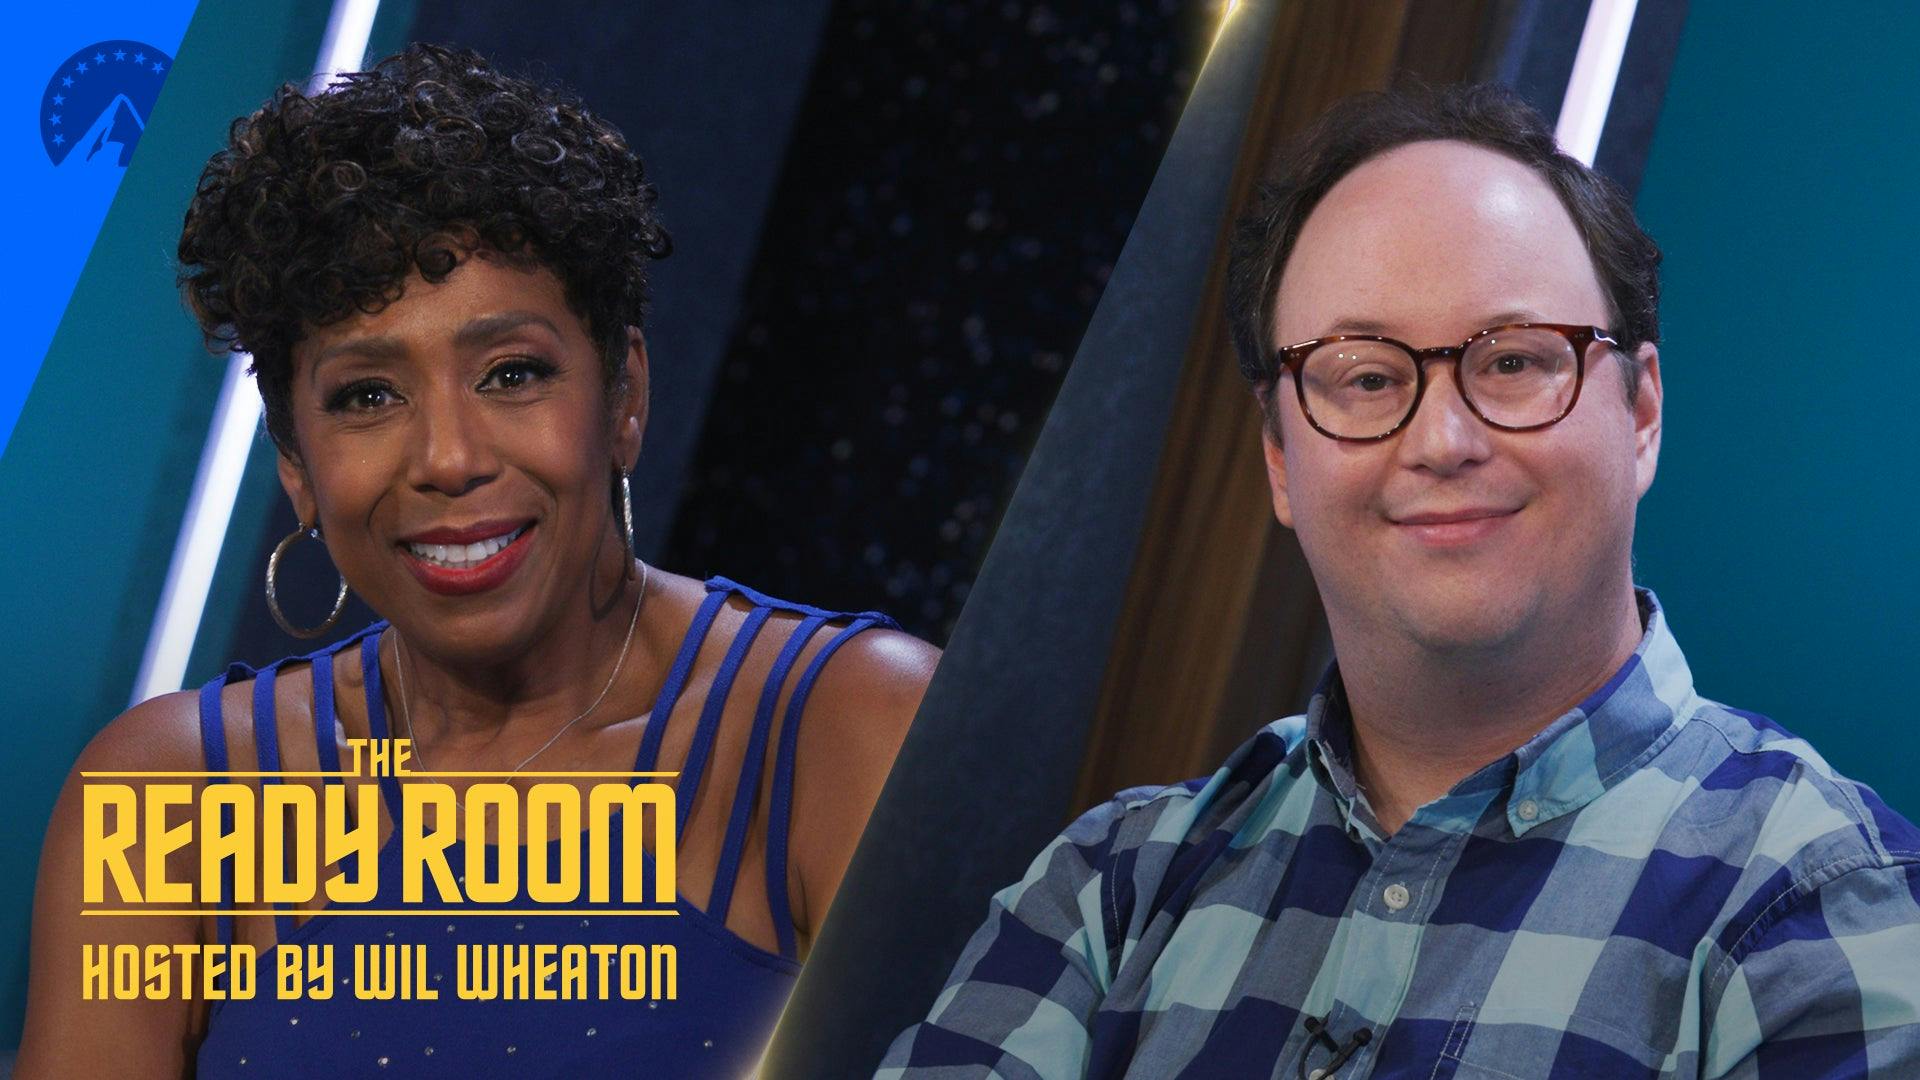 Dawnn Lewis and Mike McMahan appear on The Ready Room to discuss Lower Decks Season 3